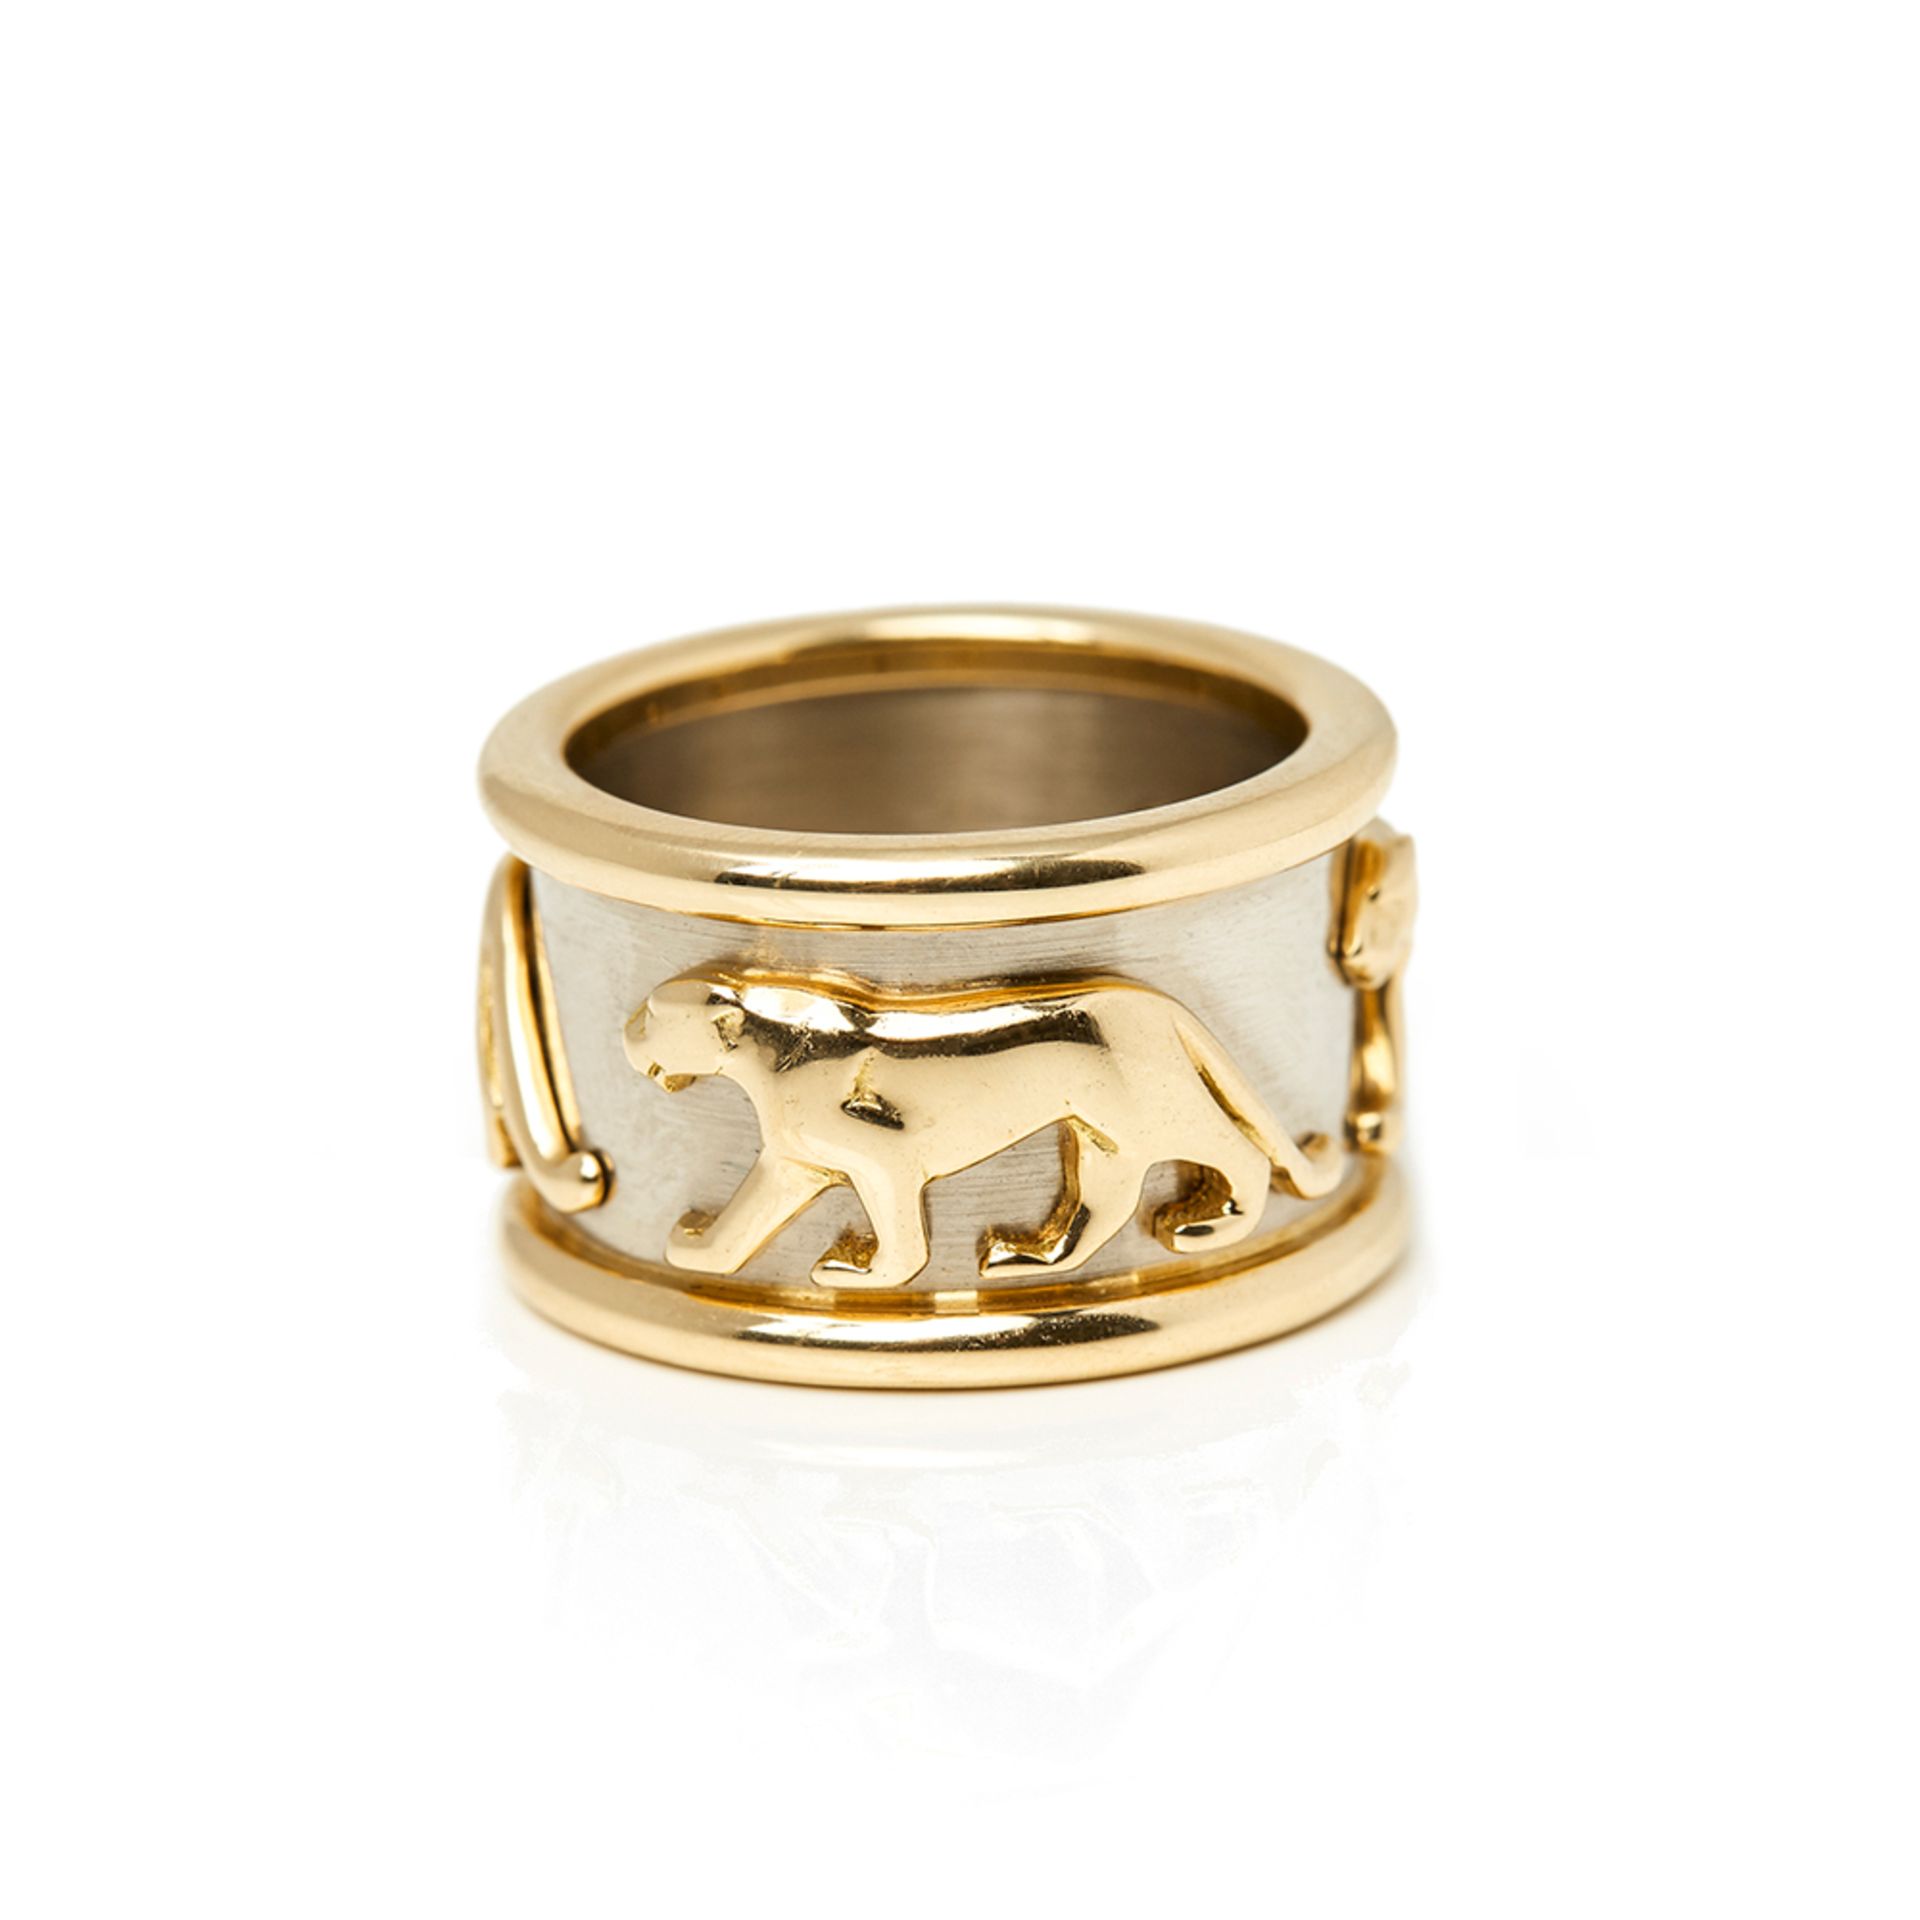 Cartier 18k Yellow & 18k White Gold Panthère Ring - Image 2 of 7